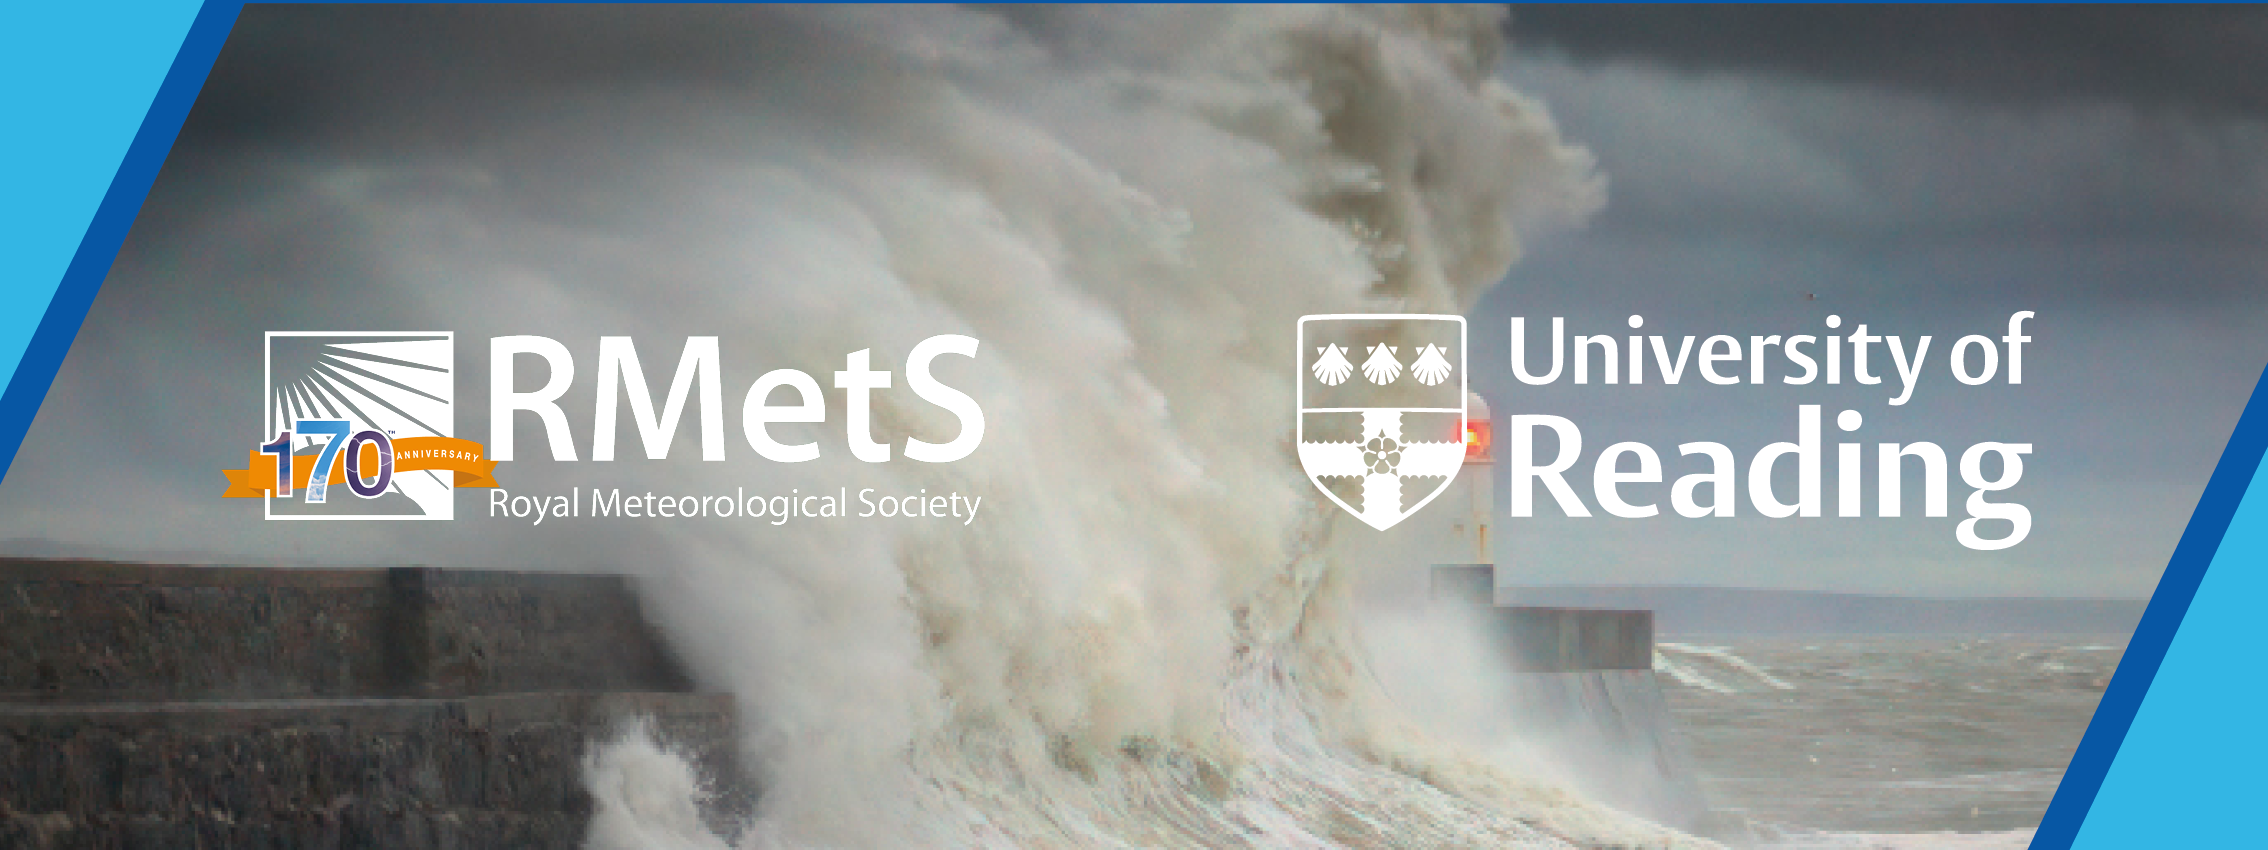 Event banner showing storm wave and RMetS and University of Reading logos